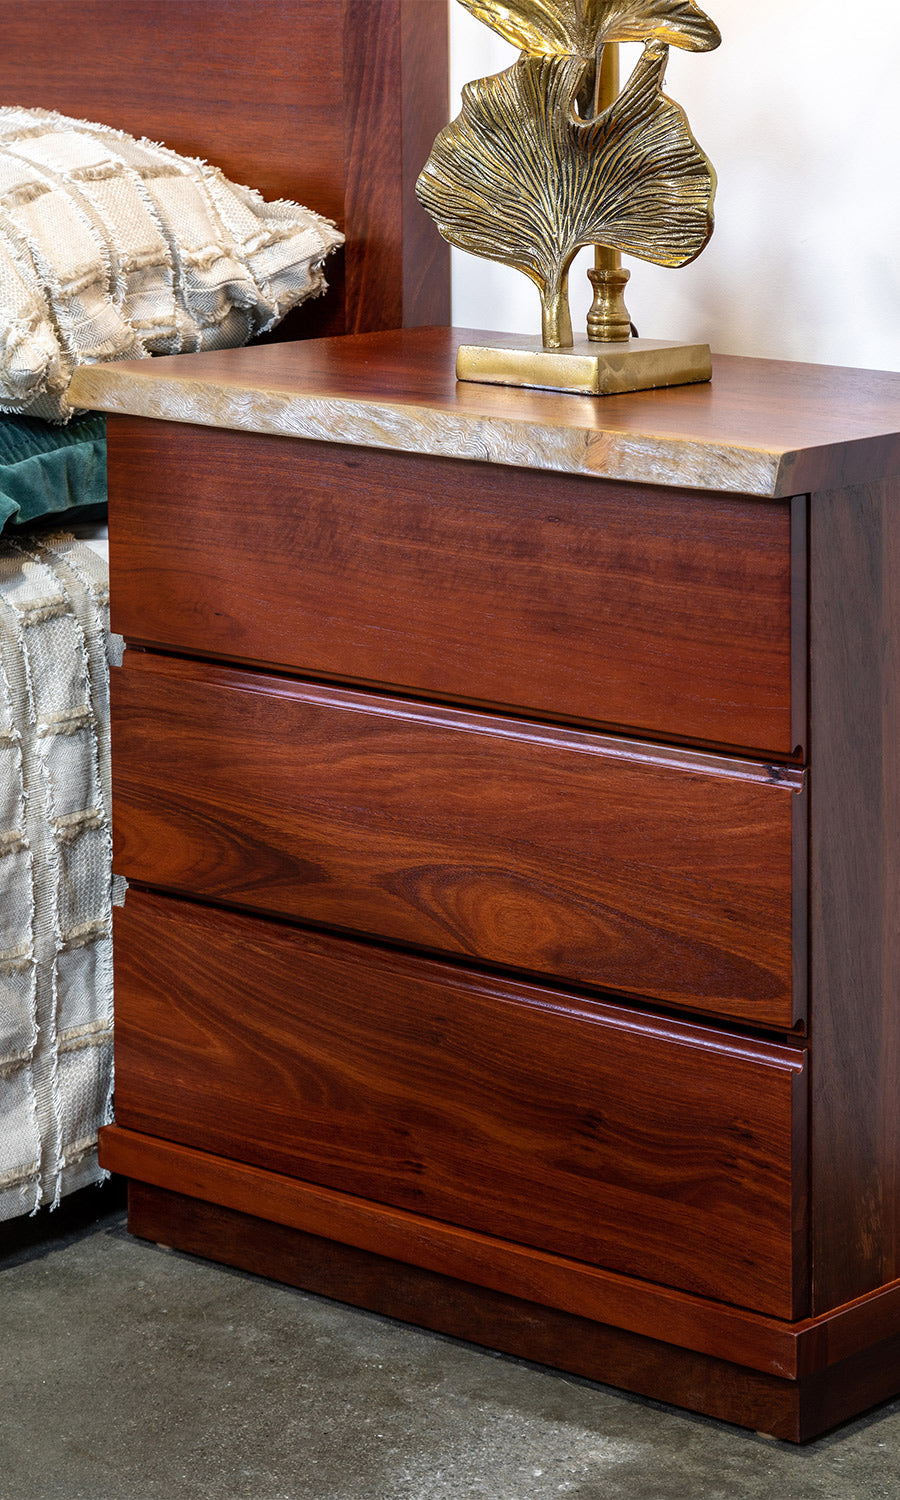 Naturaliste Natural Edge Jarrah Timber Wood Bedside Tables with drawers - Perth WA